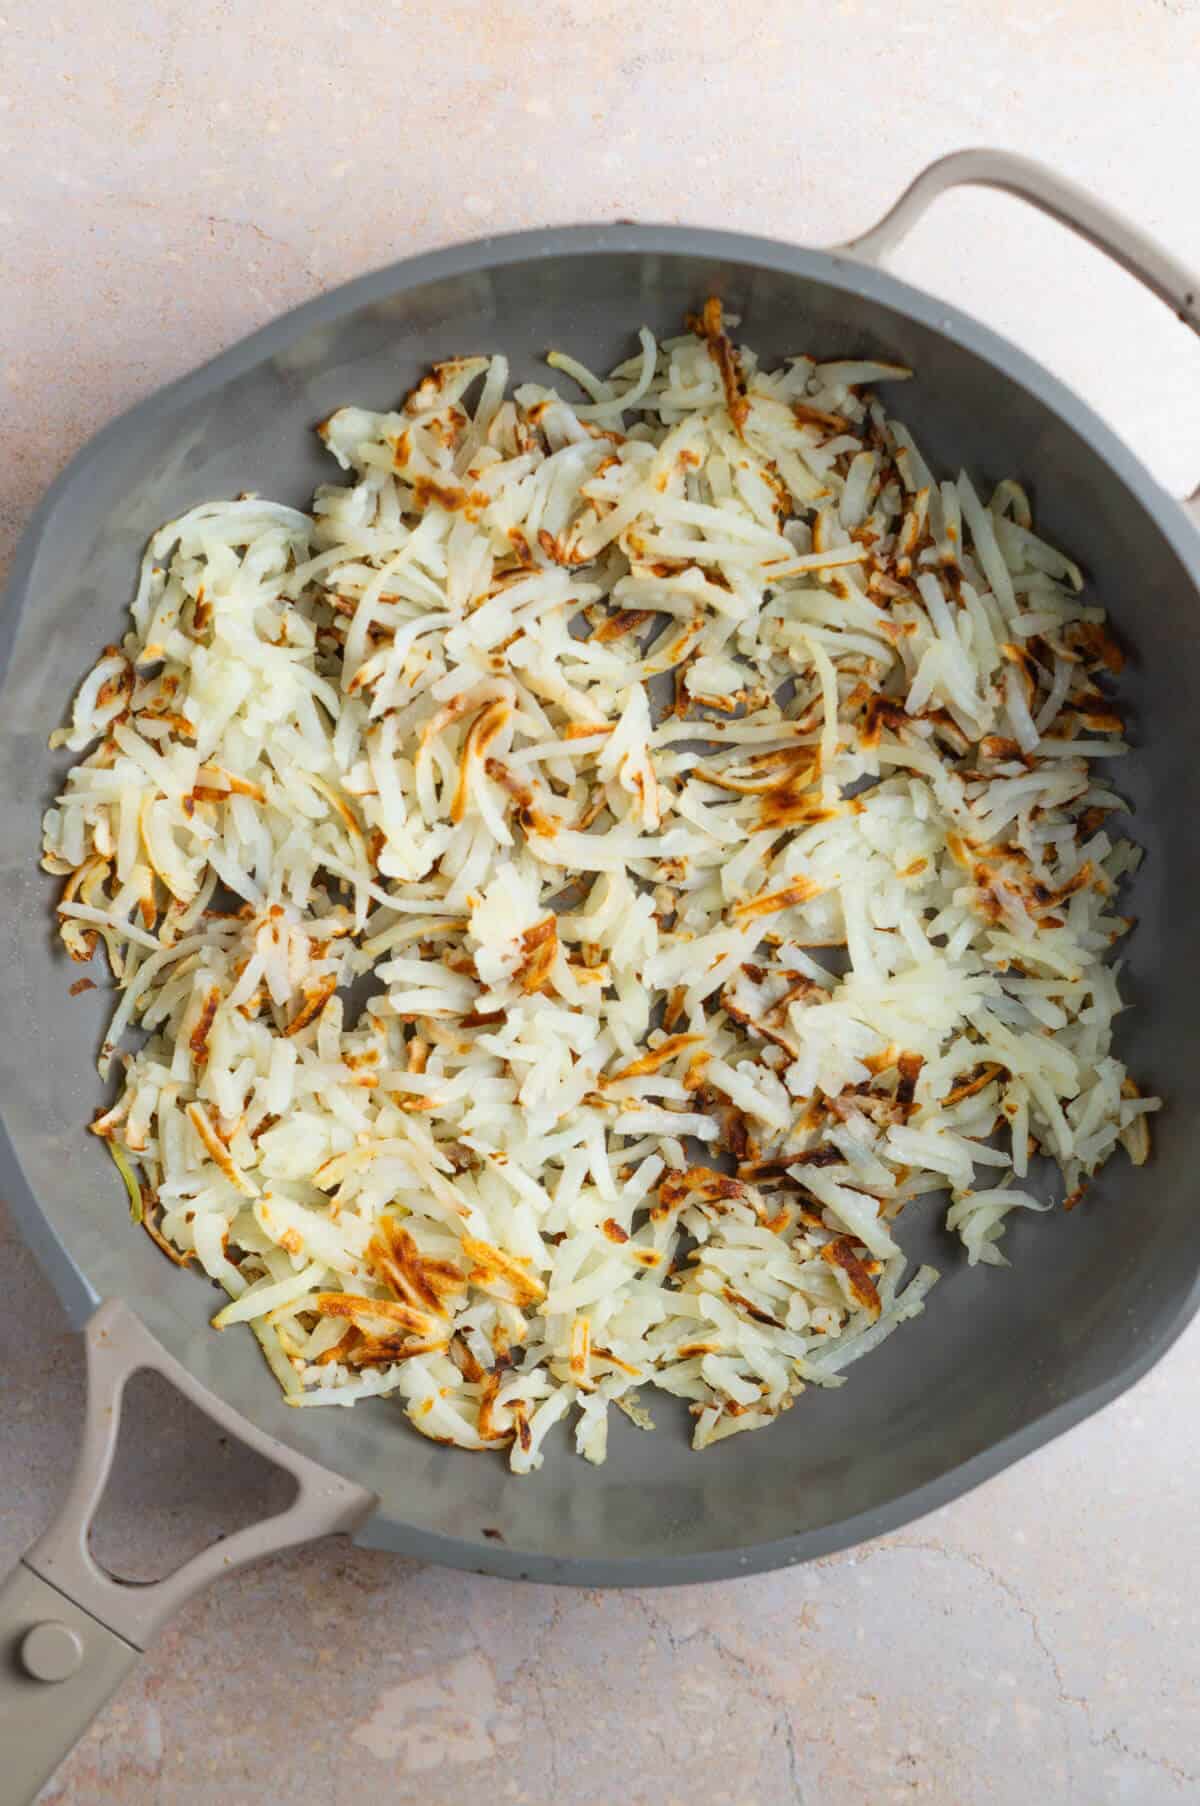 A pan with crispy hashbrowns.